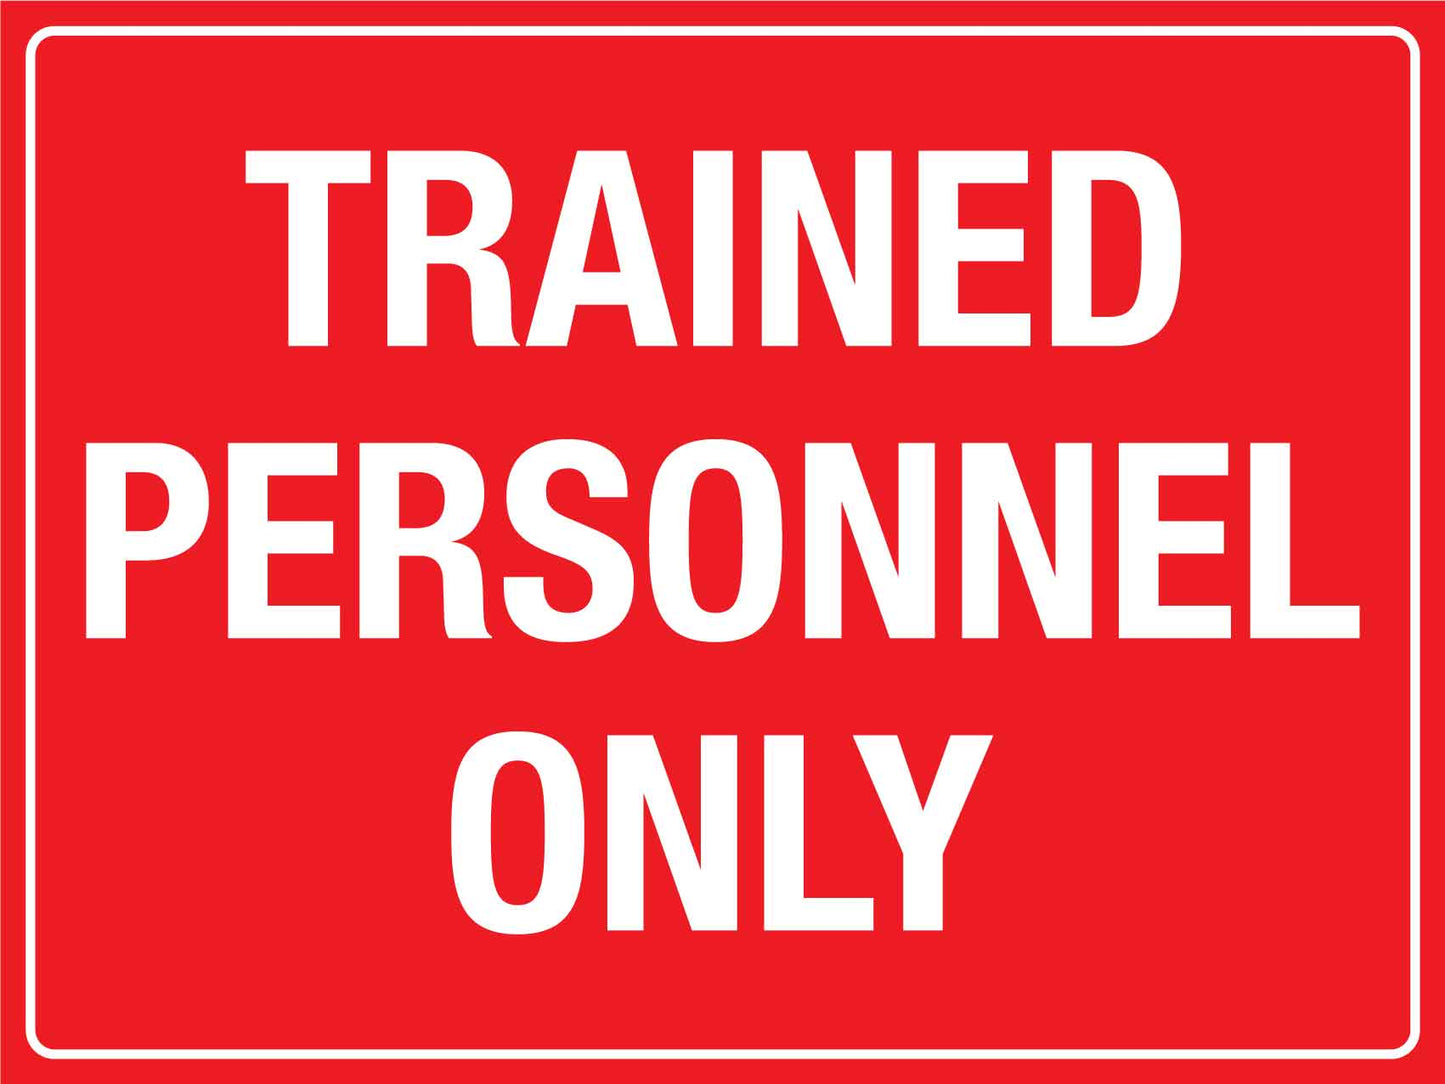 Trained Personnel Only Sign